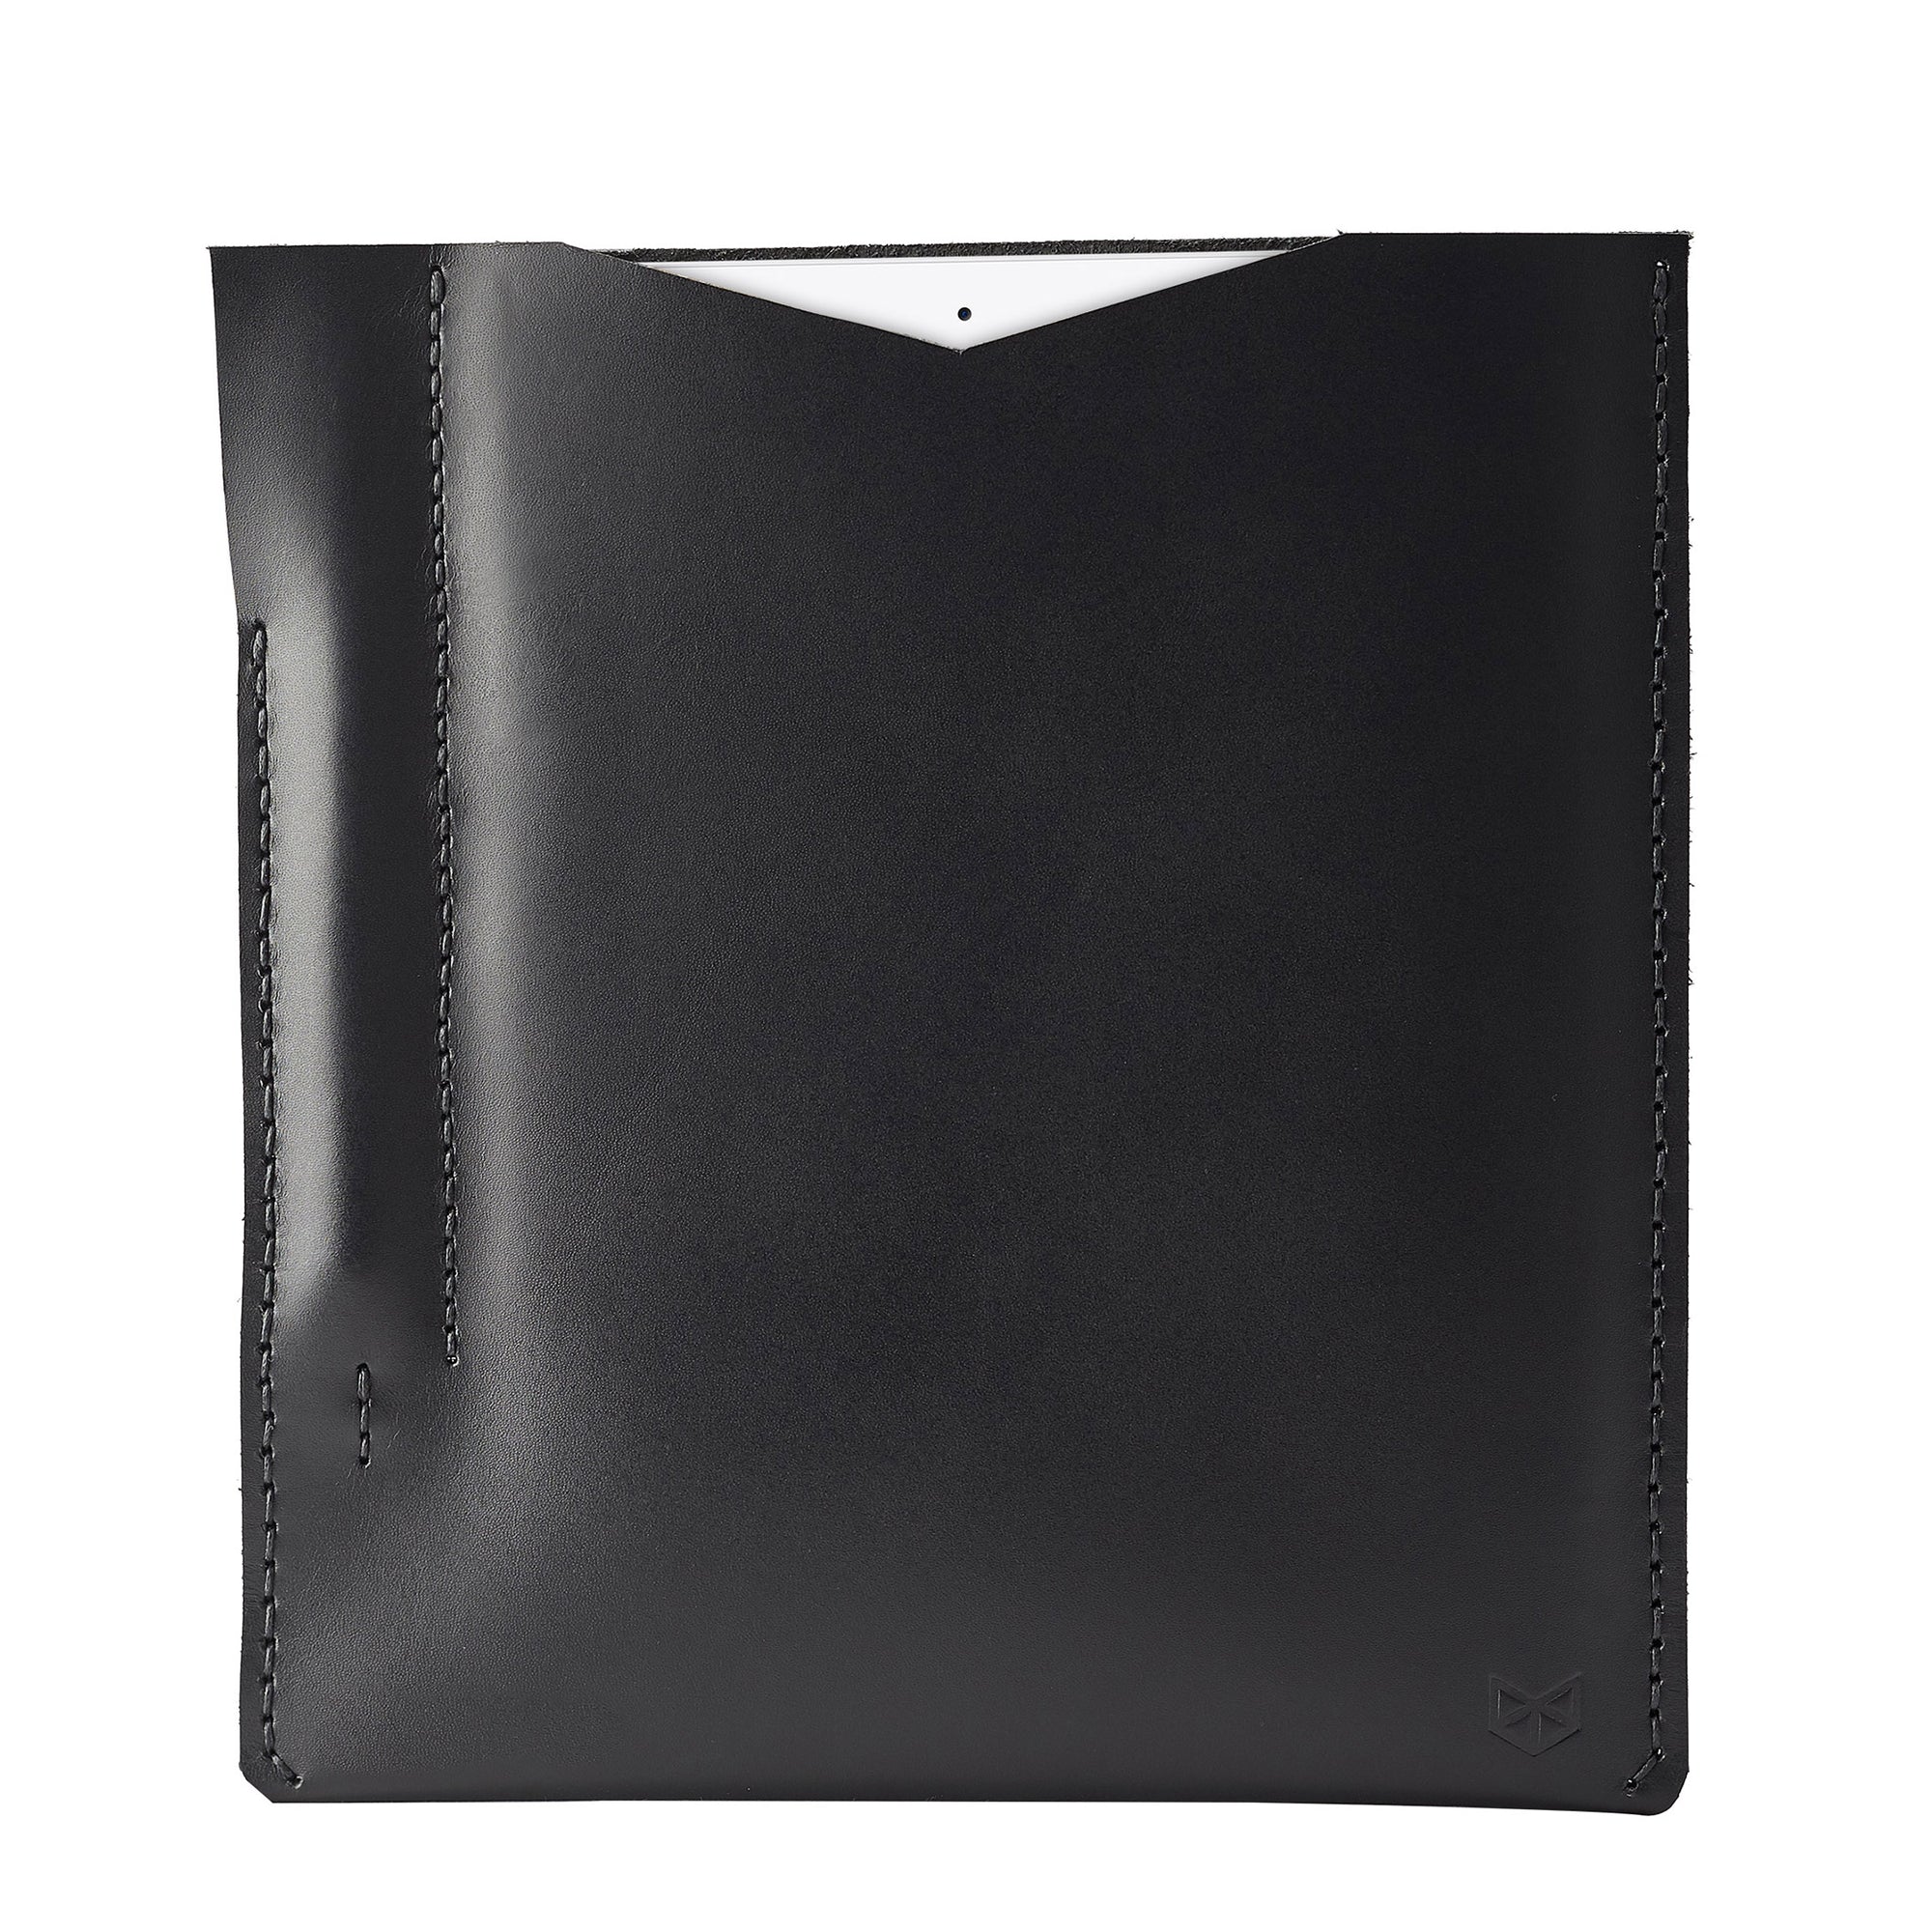 Black leather sleeve for iPad pro 10.5 inch 12.9 inch. Mens gifts